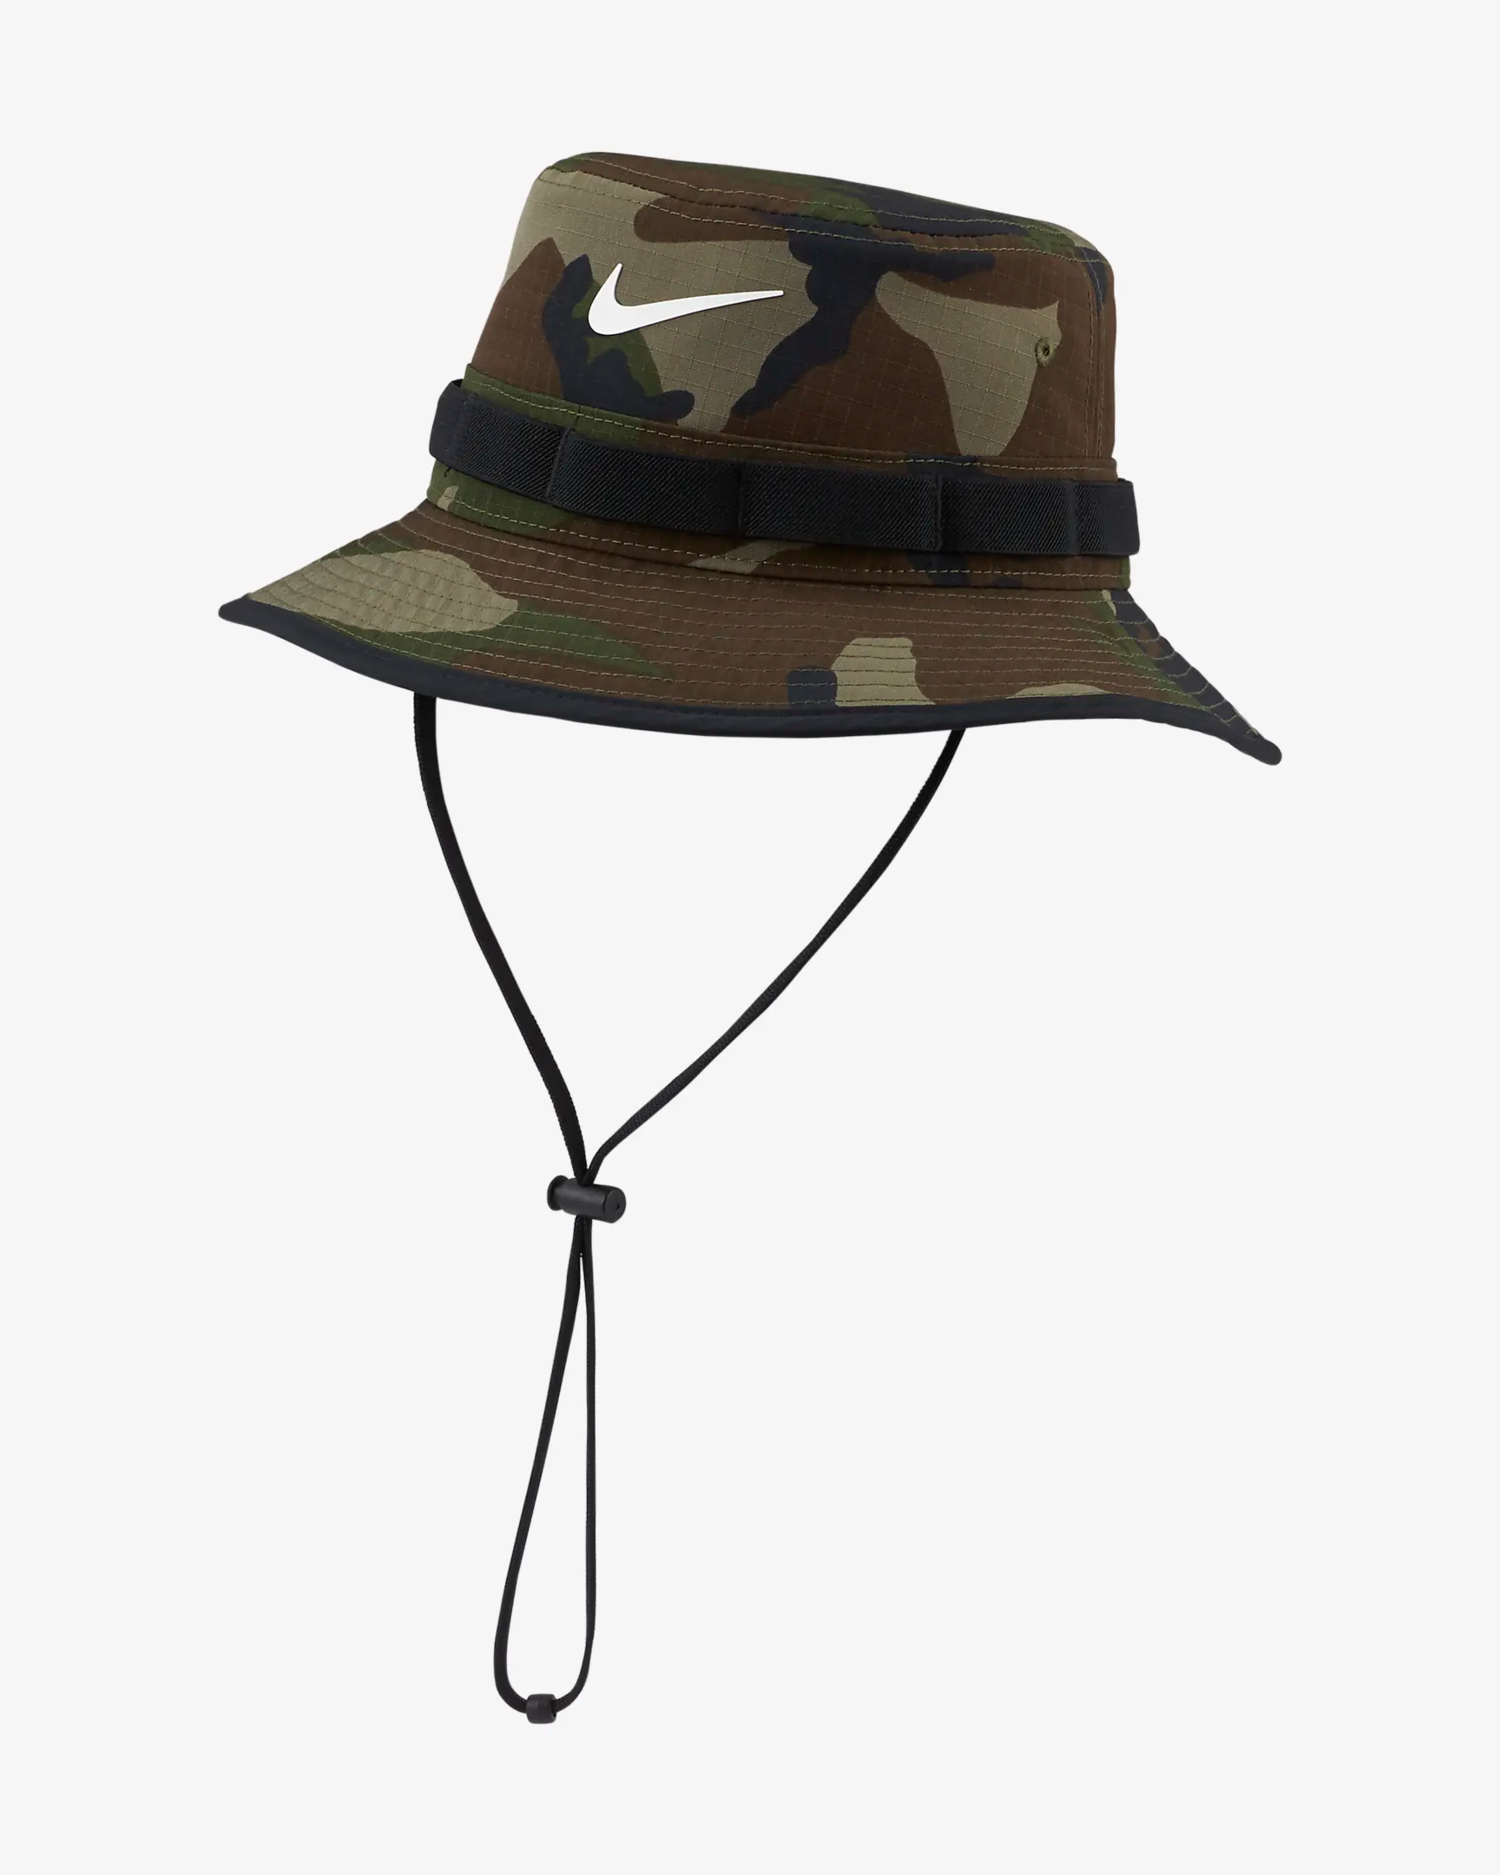 Now Available: Nike Boonie Bucket Hats — Sneaker Shouts